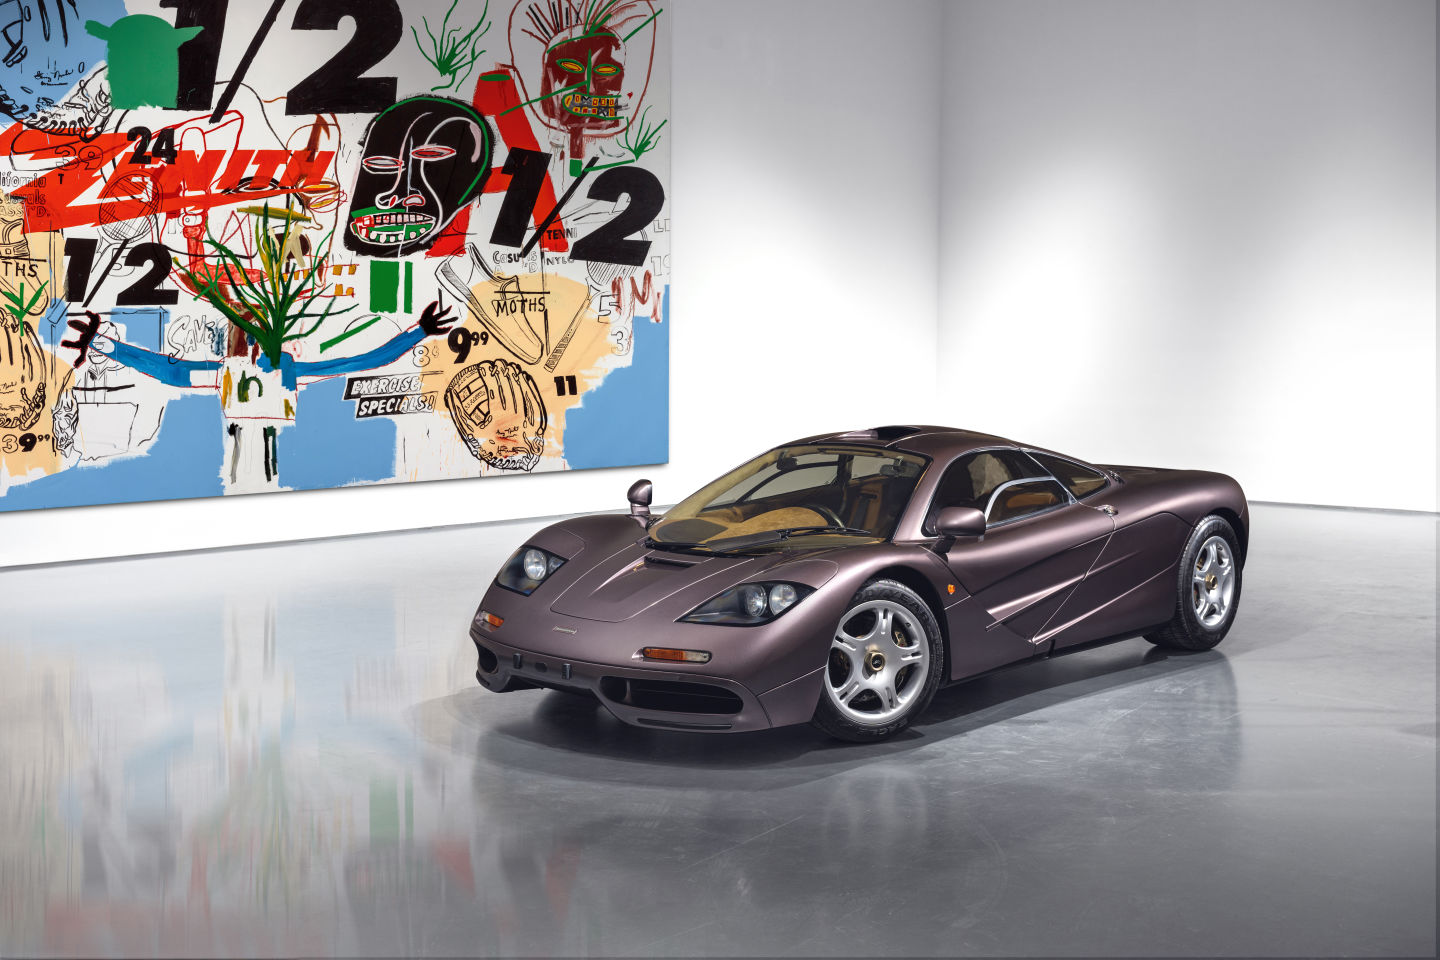 Record-breaking McLaren F1 to be Sold Again